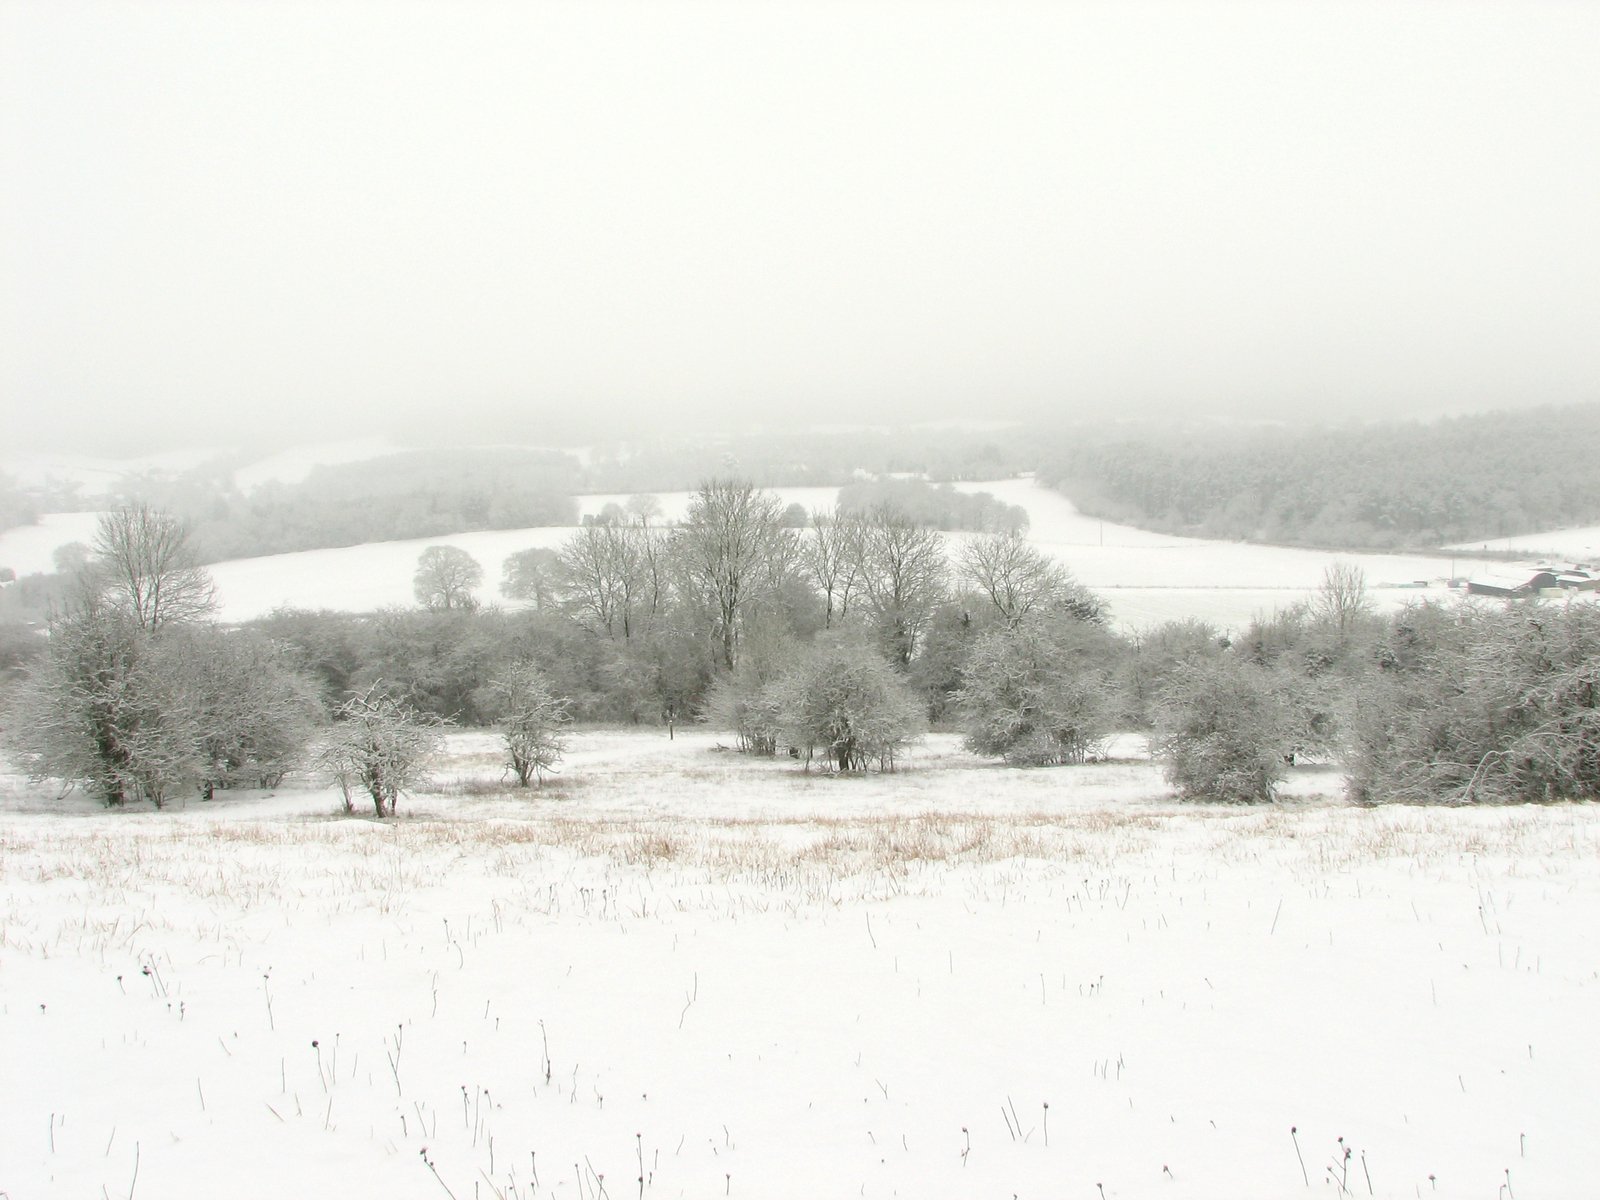 a snow covered country scene with trees on the hill